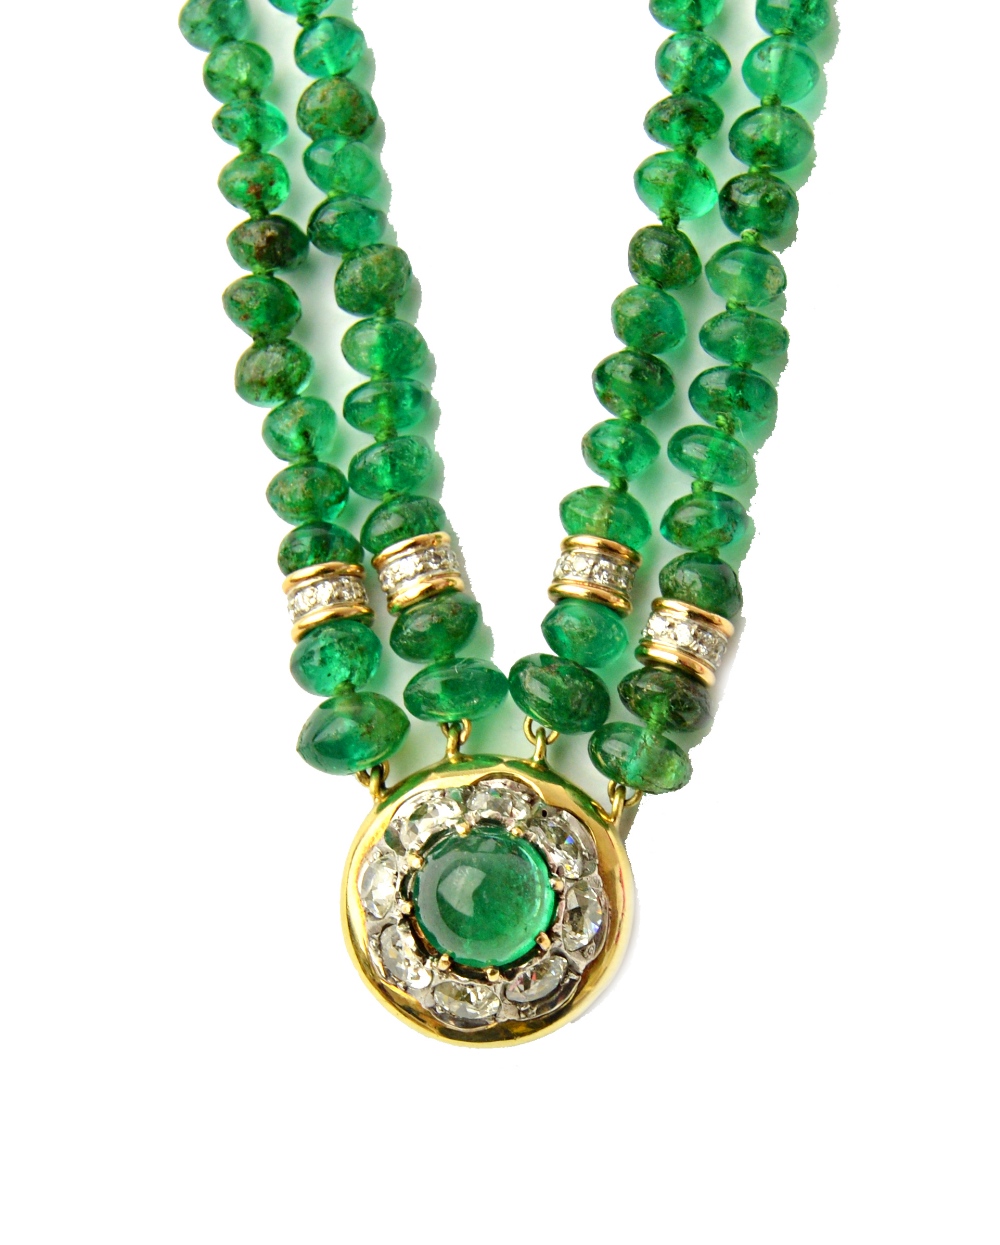 A gold mounted emerald and diamond bracelet, by Tambetti, formed as four rows of emerald beads,